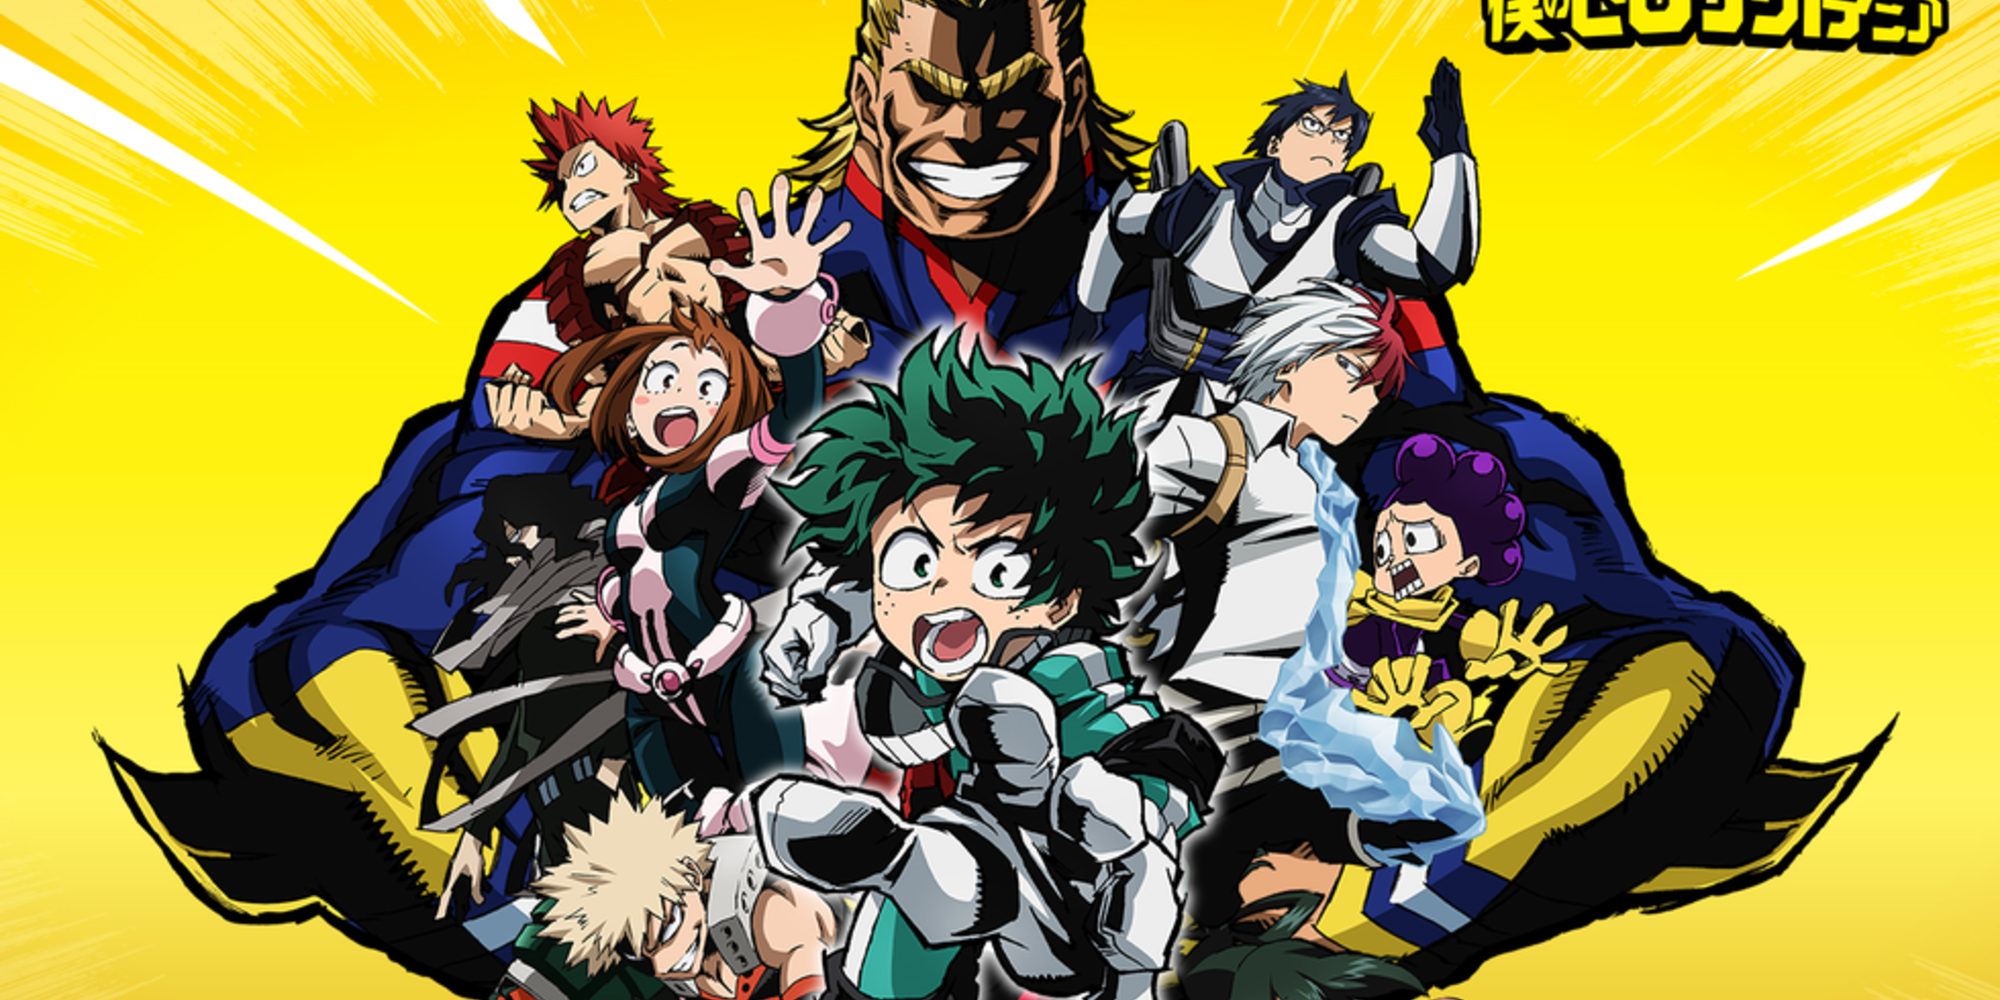 Deku and the cast of My Hero Academia leap toward the viewer in action poses